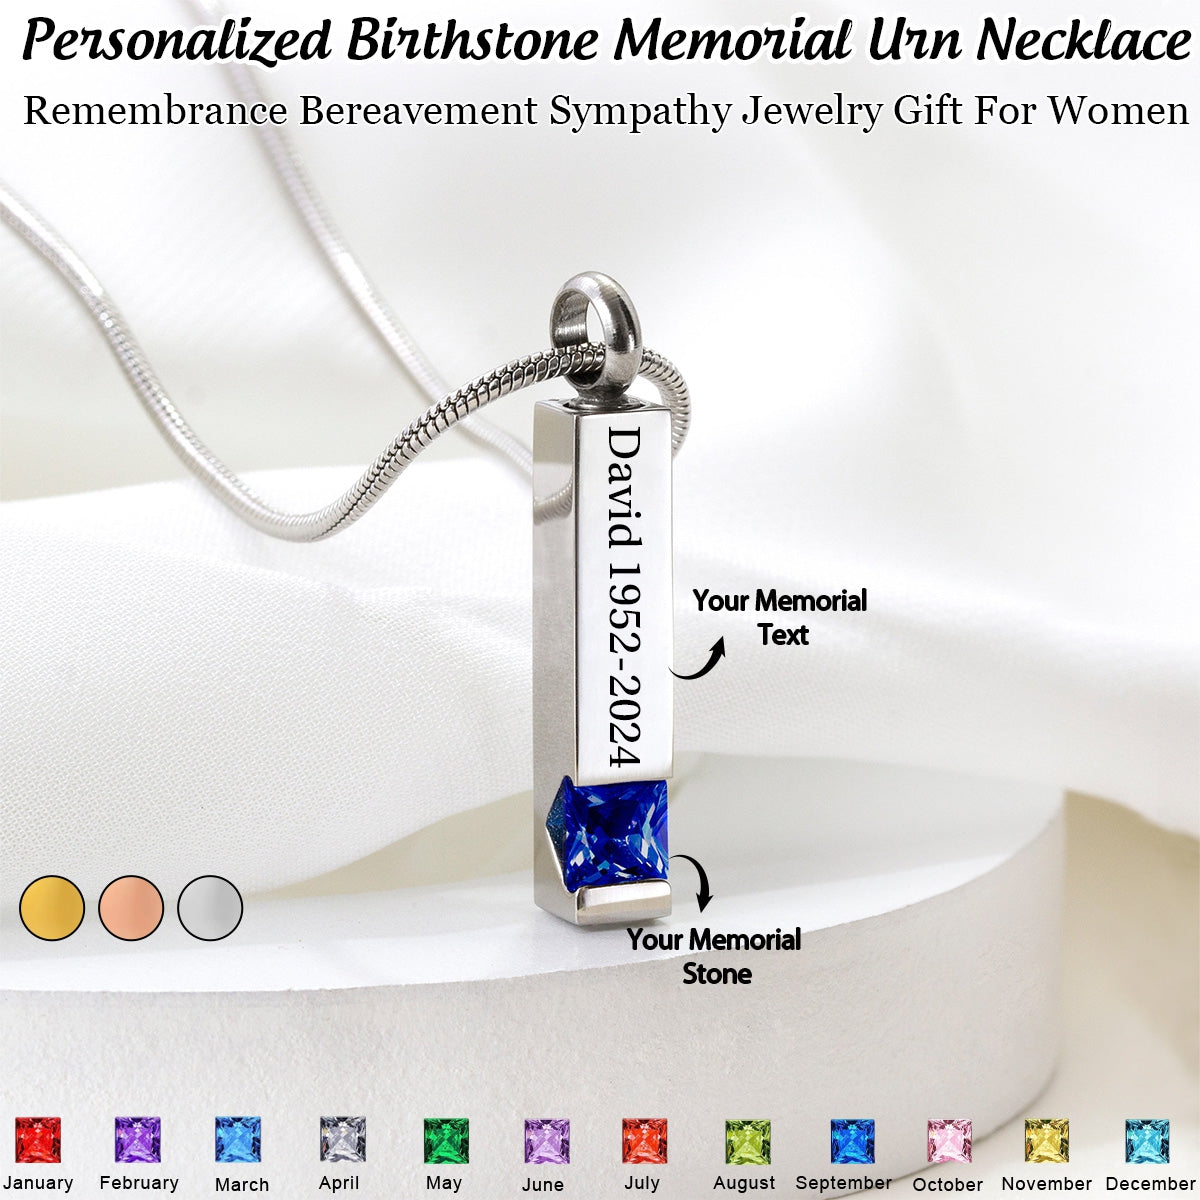 Personalized Birthstone Memorial Urn Necklace